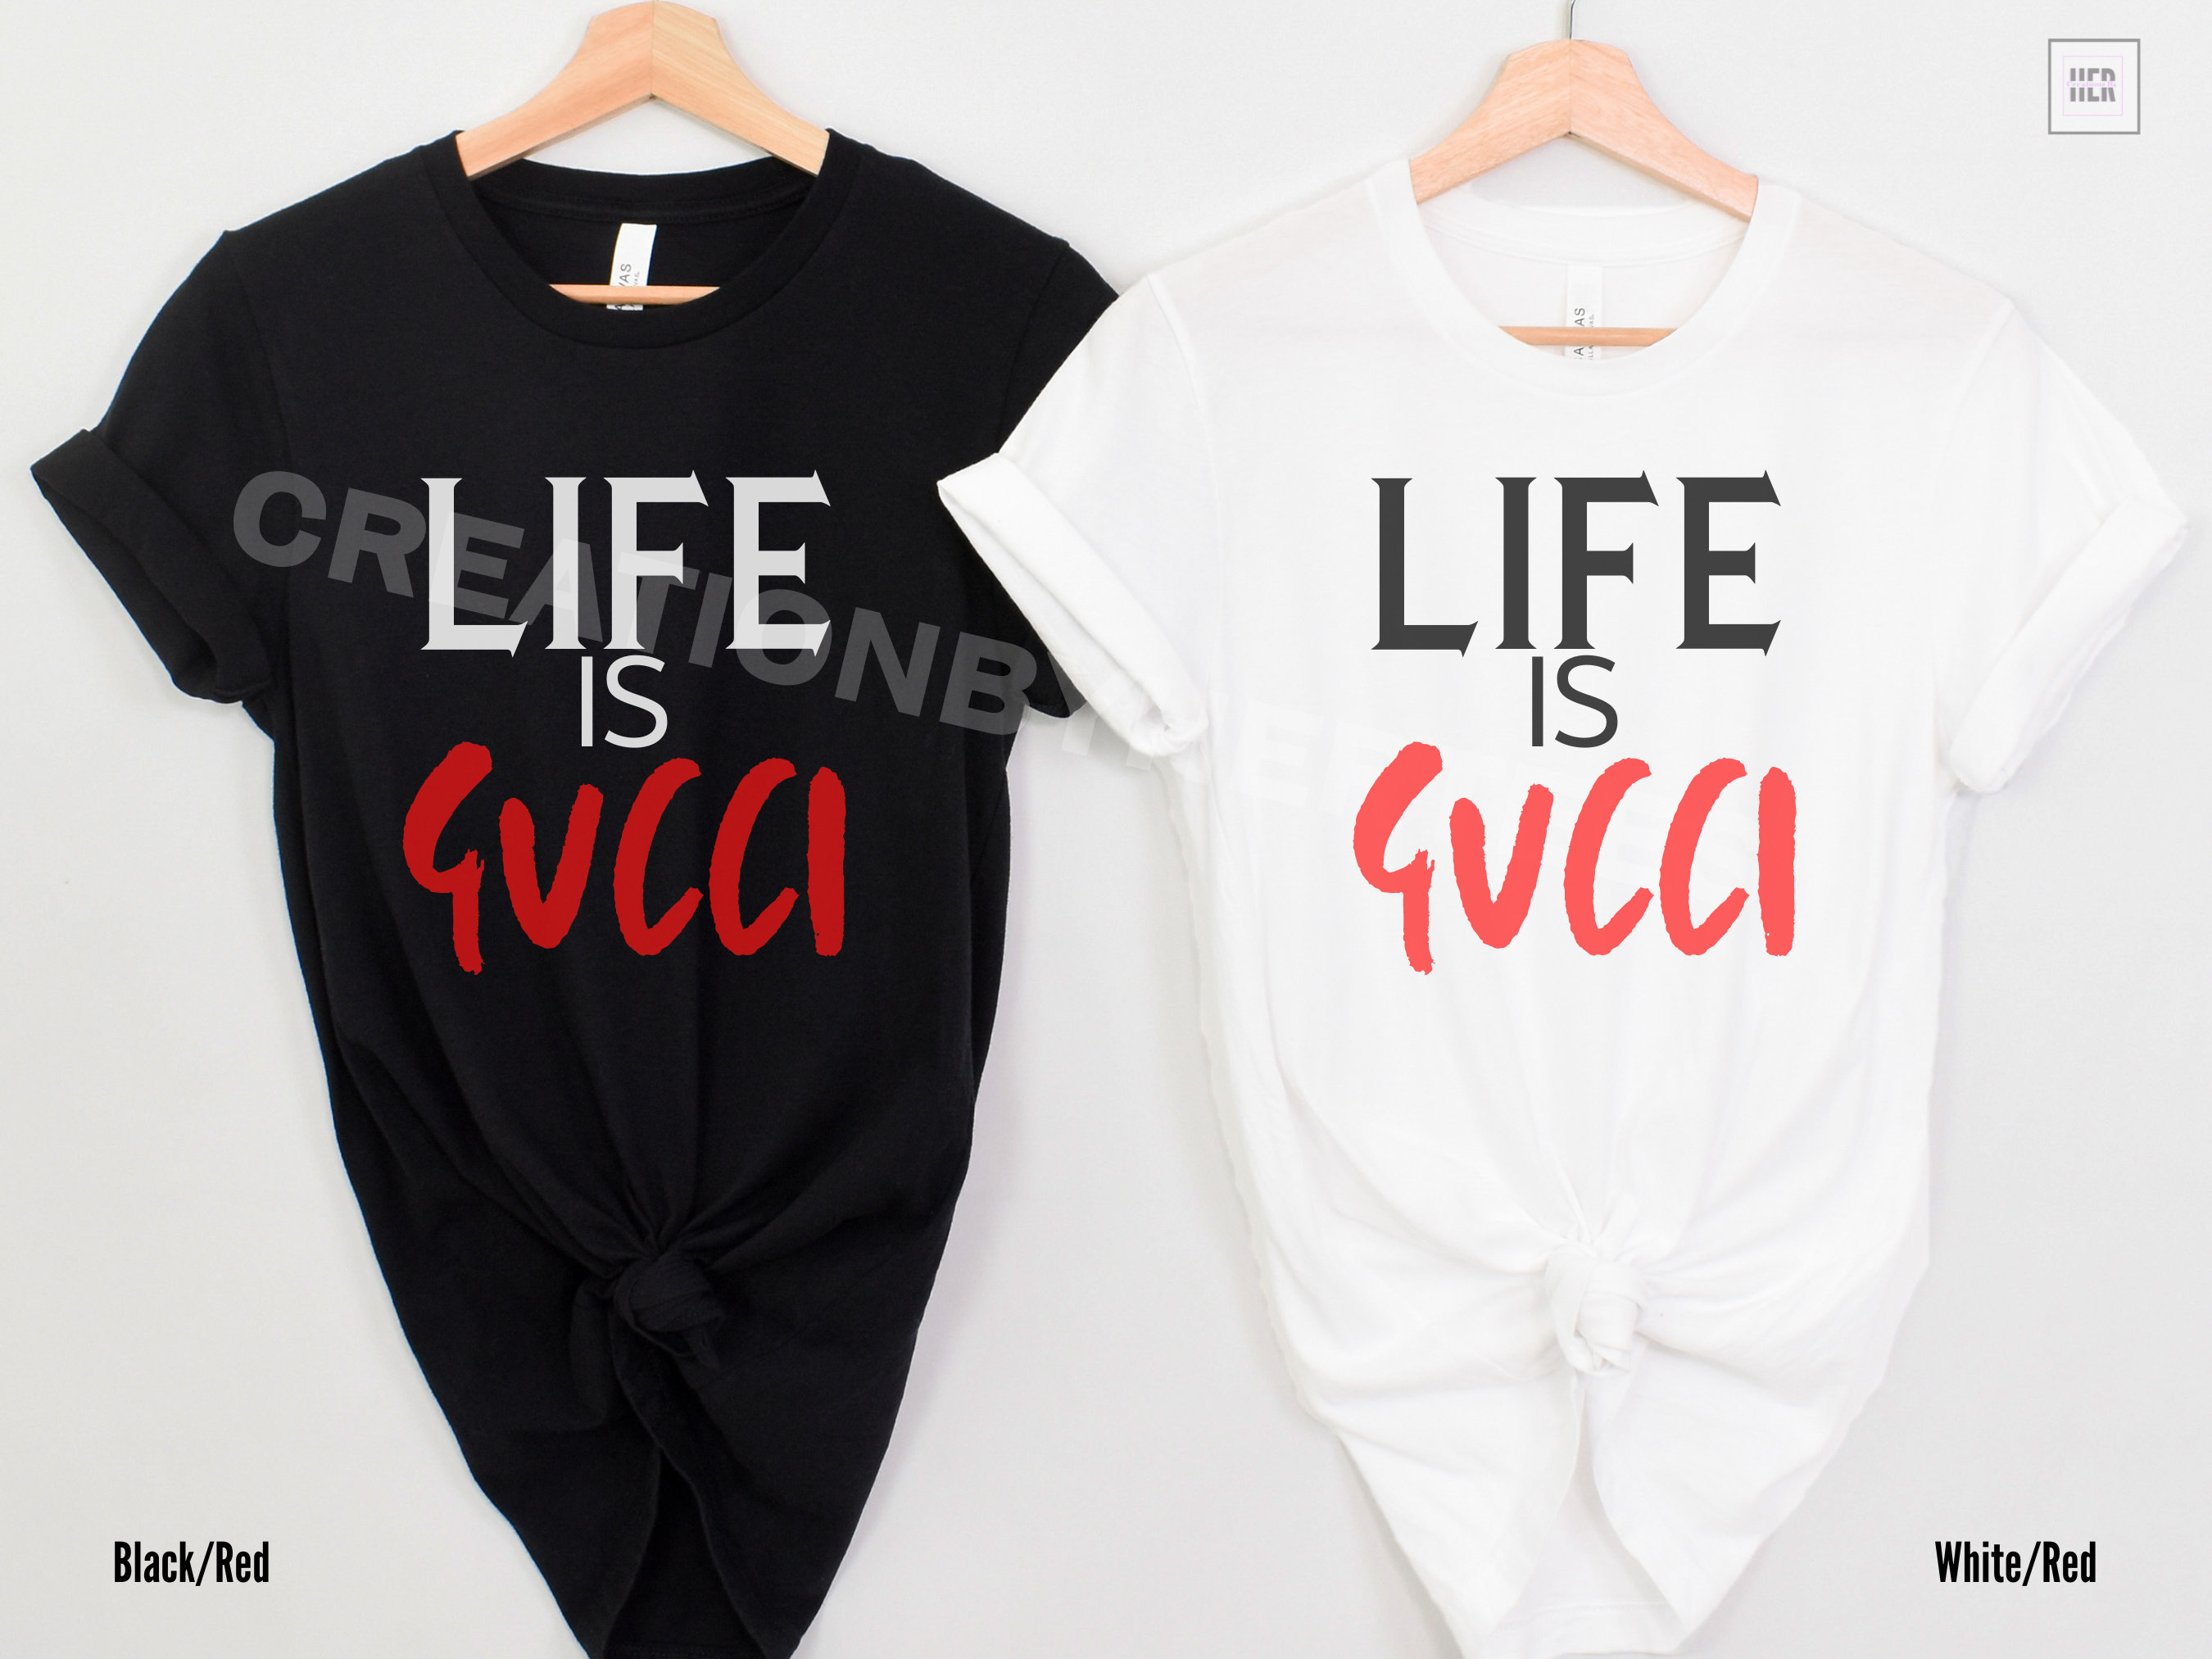 Wholesale Gucci Luxury Fashion Brand Designer Replica T-Shirts Round Neck  Short Sleeve Polo Tees - China Tshirts and Gucci T-Shirts price